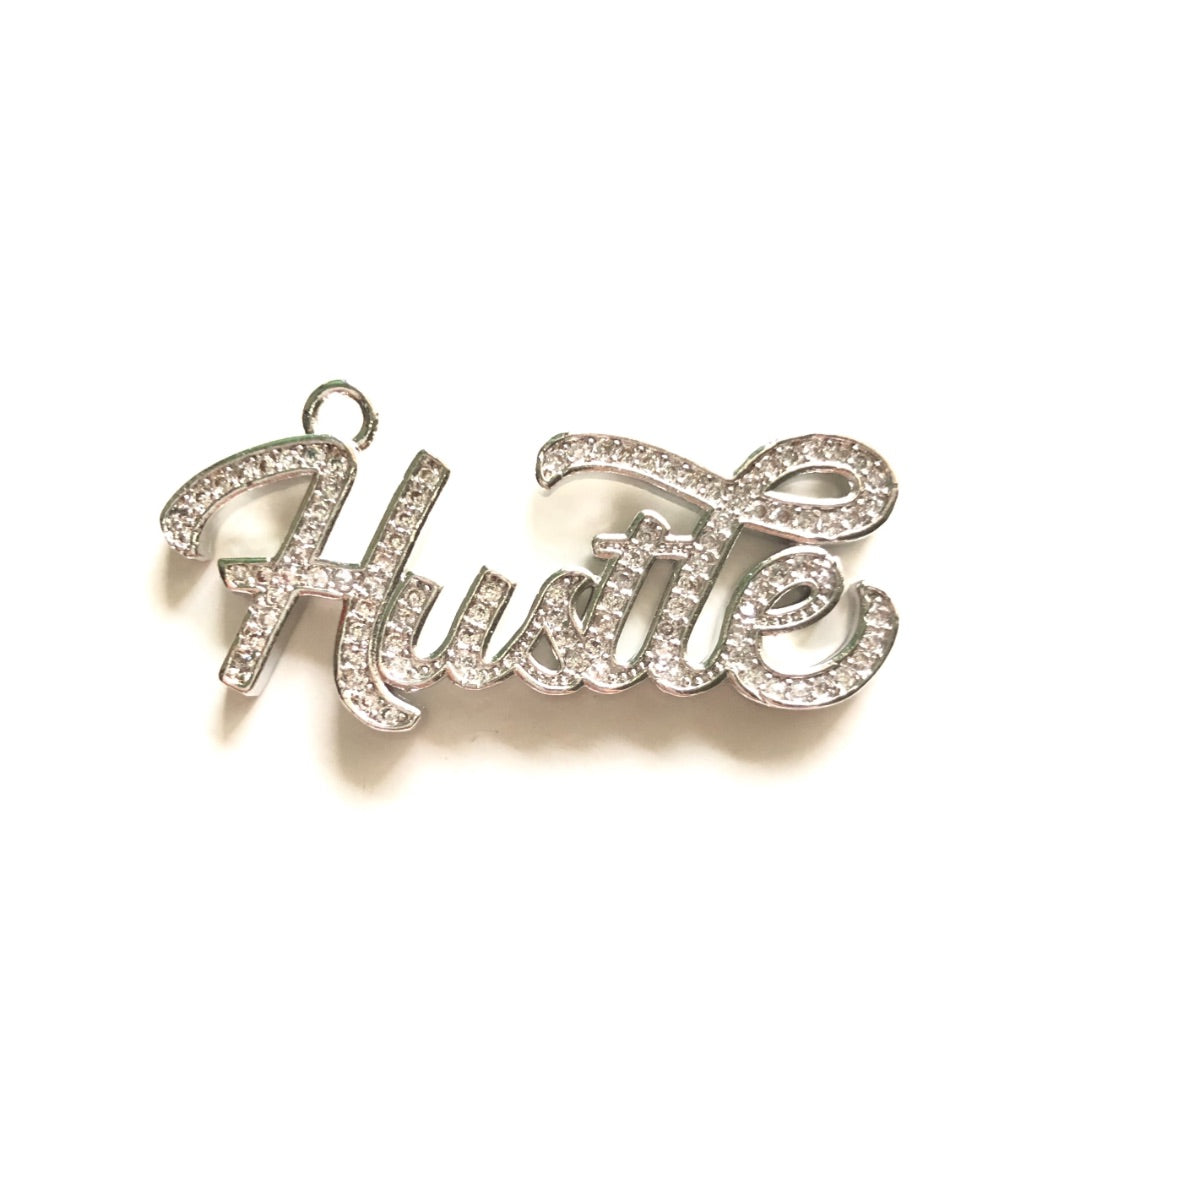 10pcs/lot 37.5*18mm CZ Paved Hustle Charms Silver CZ Paved Charms On Sale Words & Quotes Charms Beads Beyond